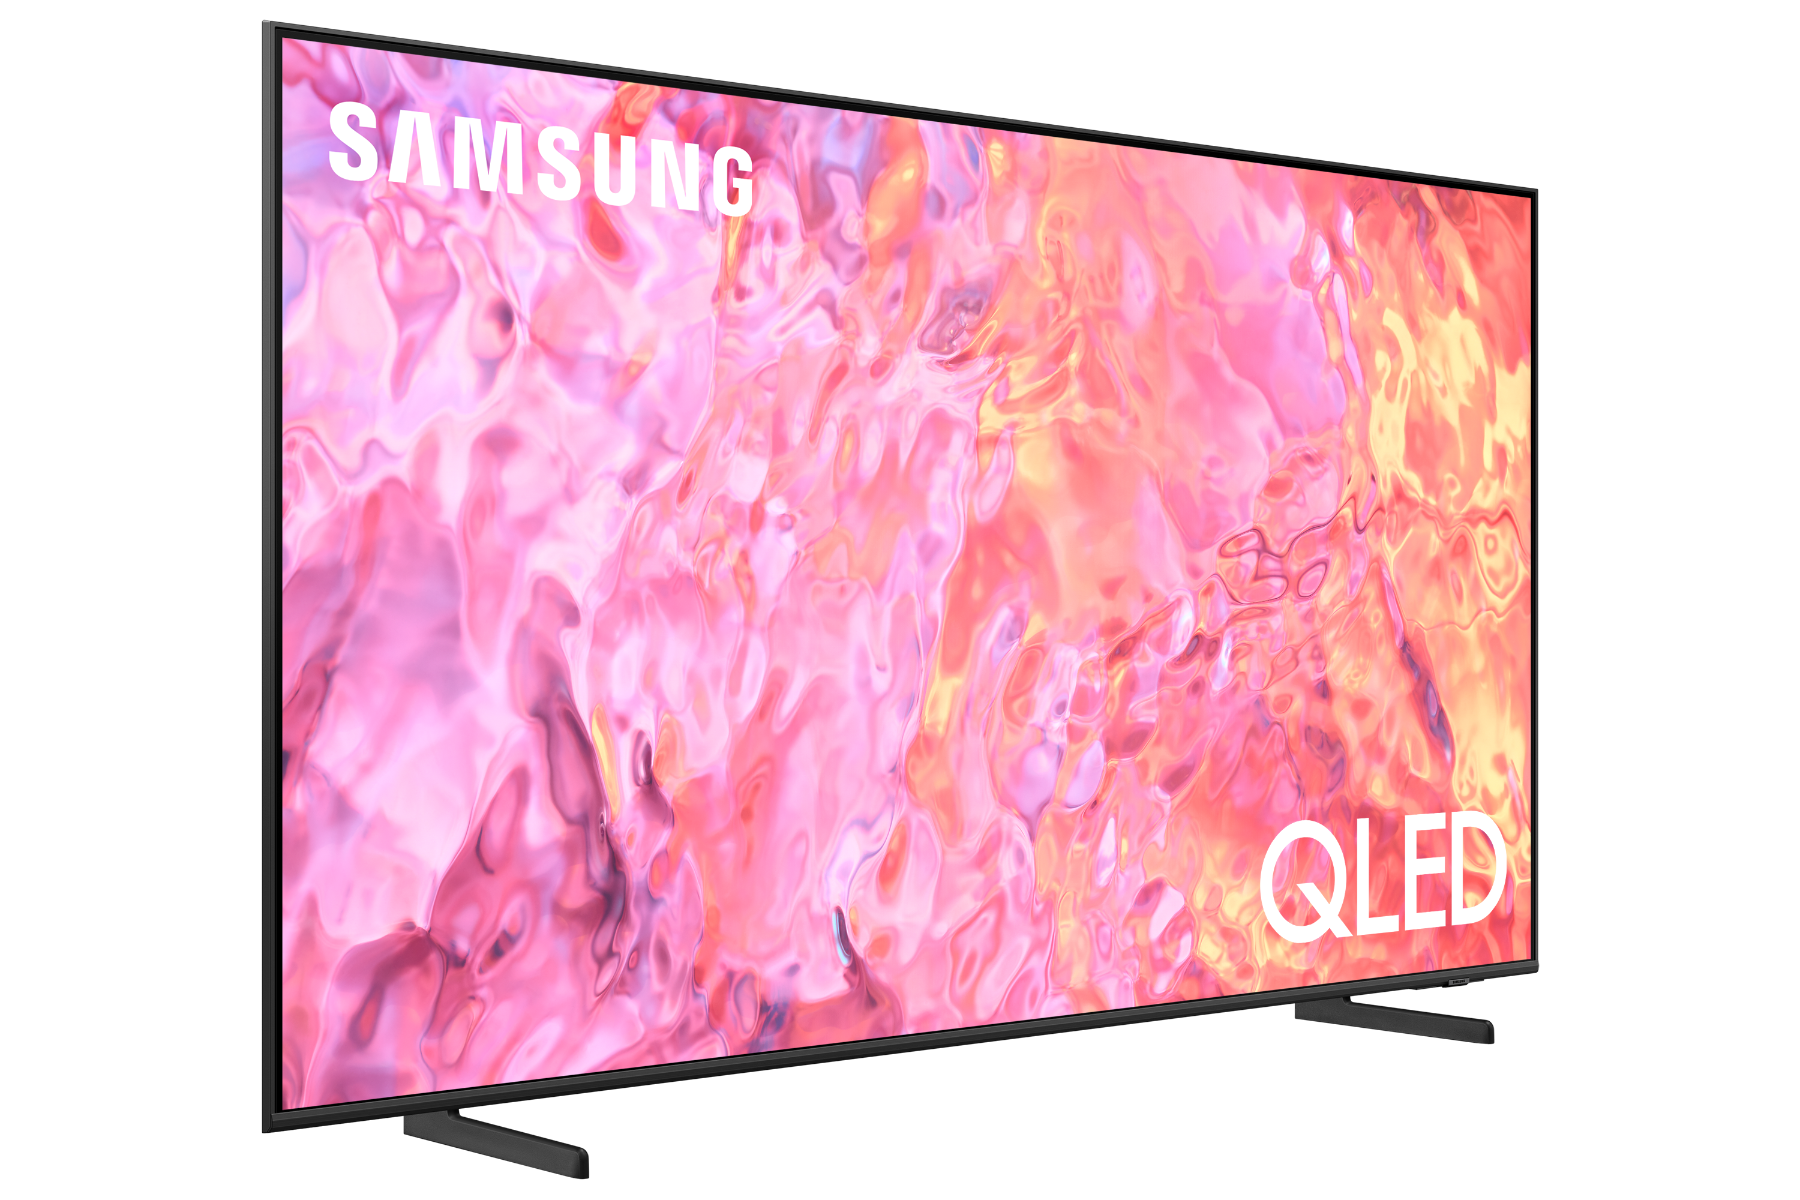 Samsung 85 Inch 4K UHD Smart QLED TV With Built In Receiver - QA85Q60C